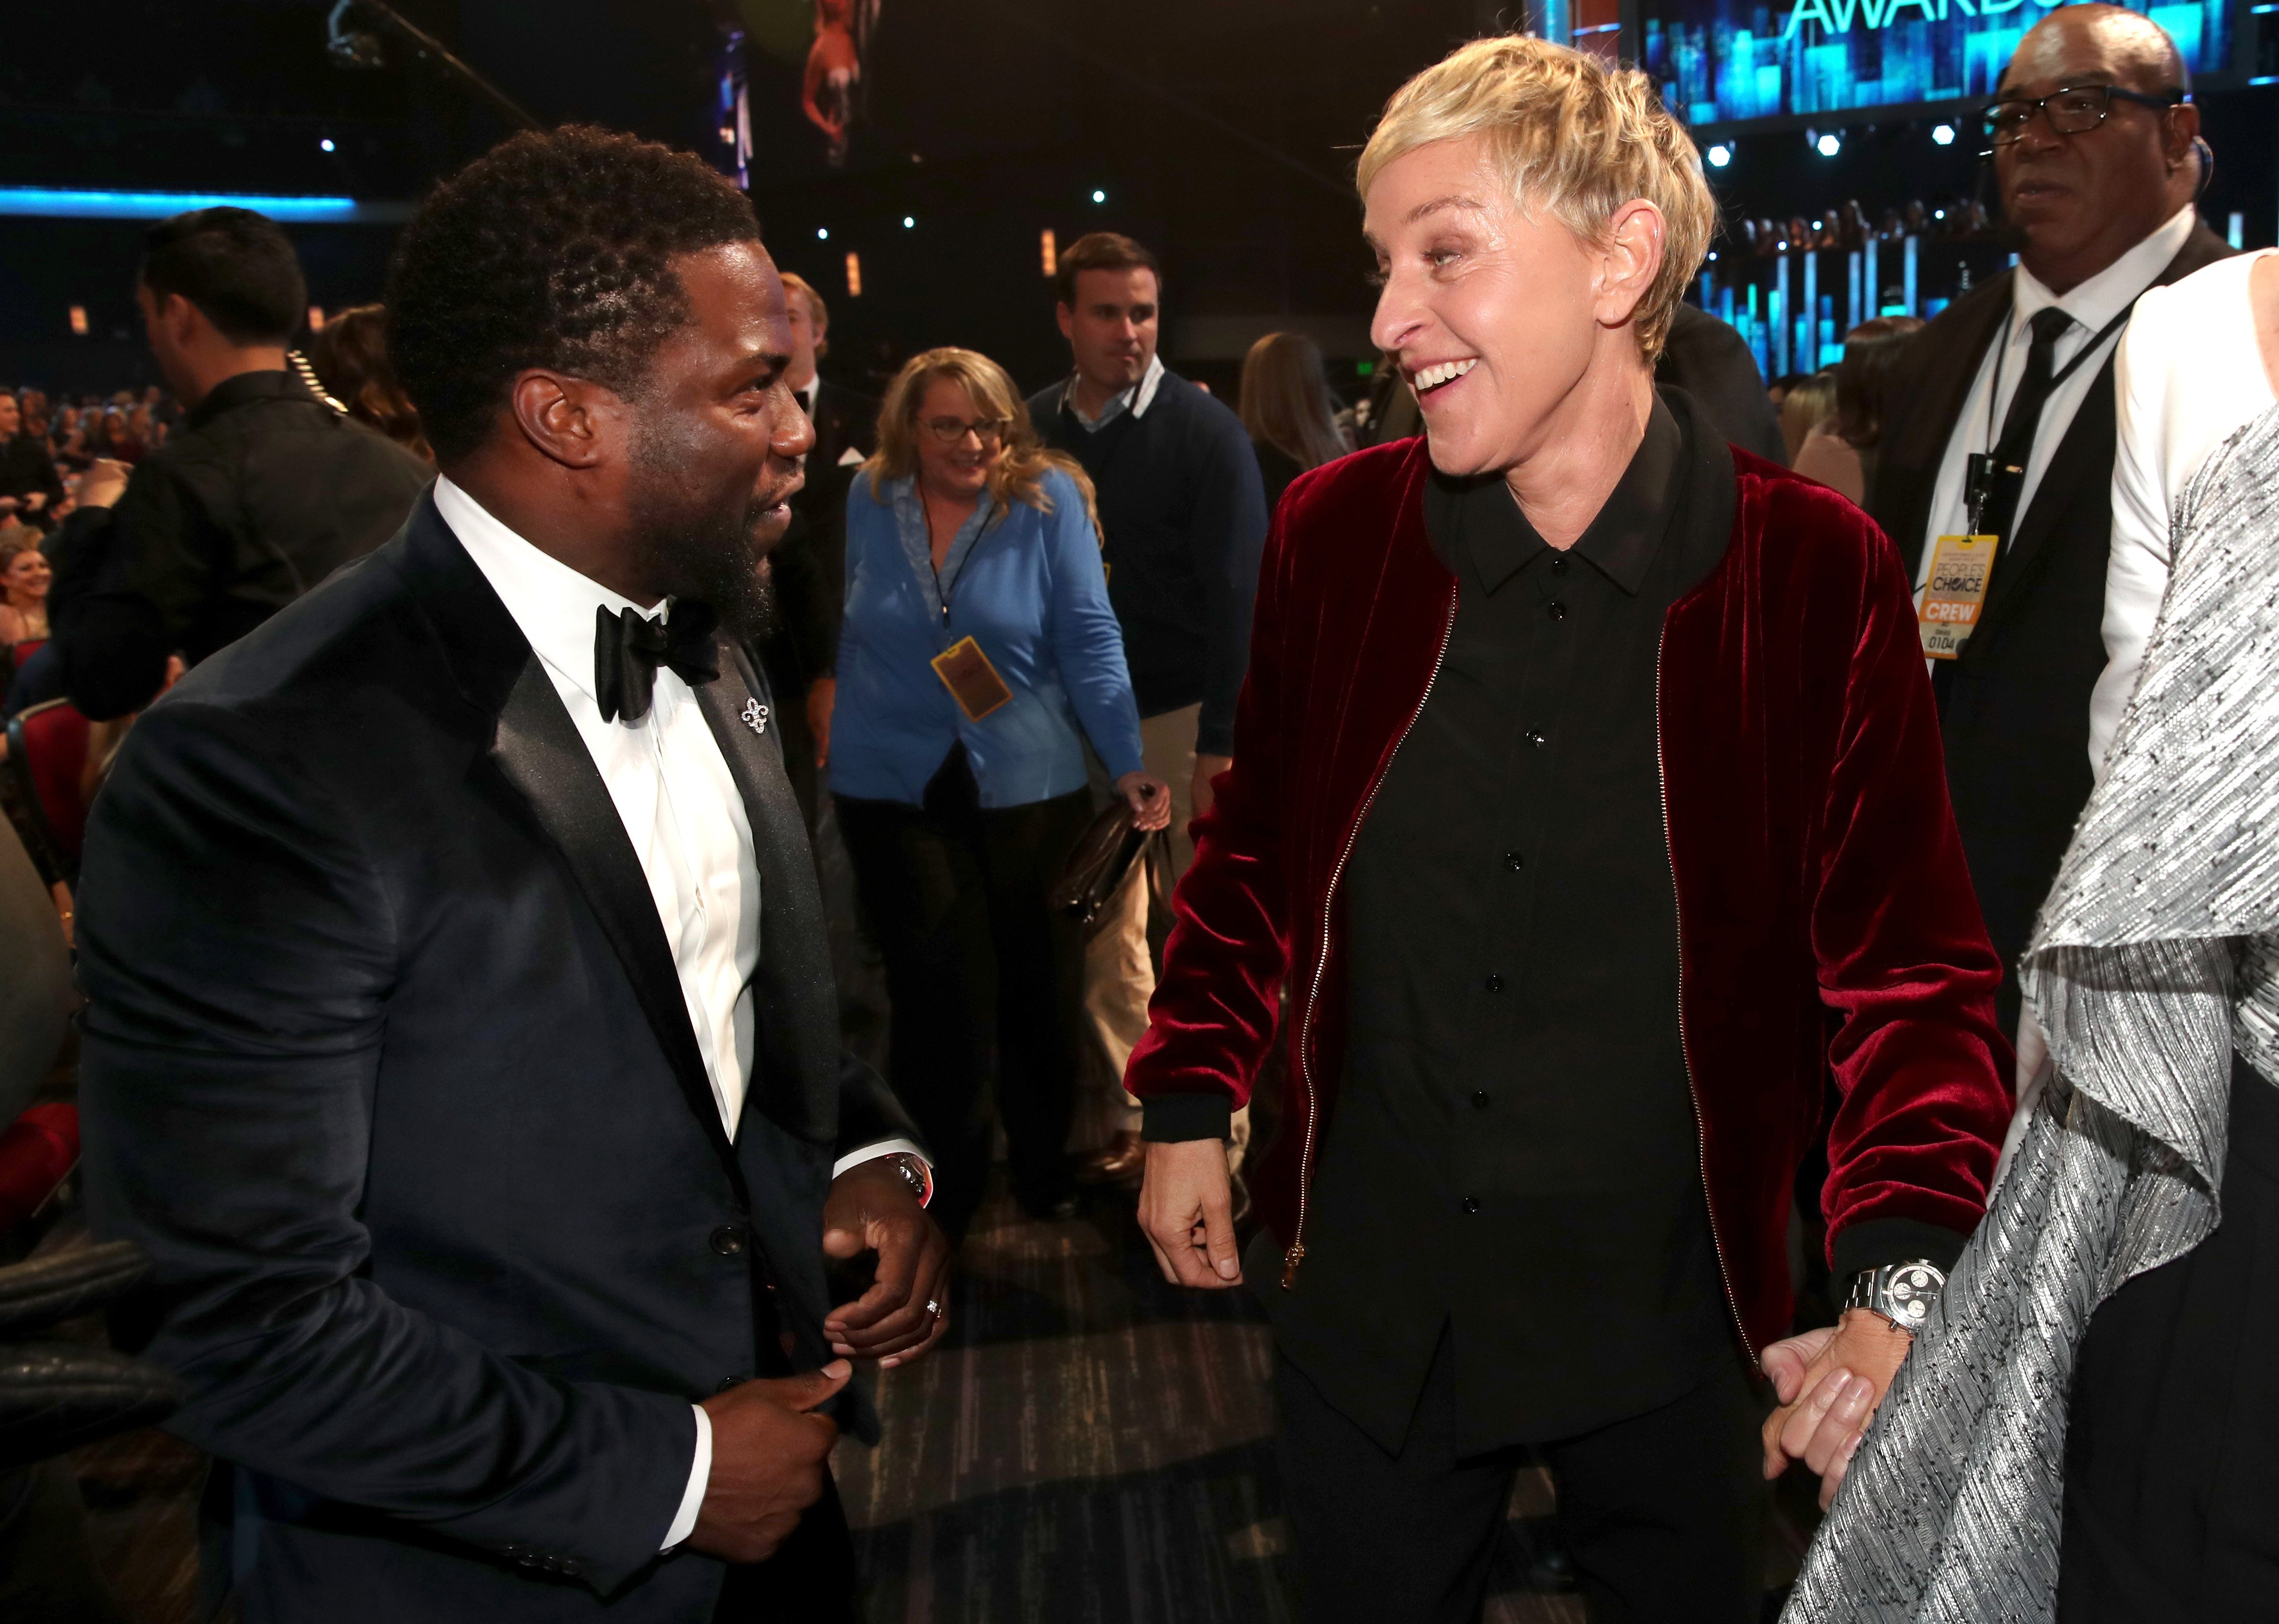 LOS ANGELES, CA - JANUARY 18: Actor Kevin Hart (L) and TV personality/actress Ellen DeGeneres attend the People's Choice Awards 2017 at Microsoft Theater on January 18, 2017 in Los Angeles, California. (Photo by Christopher Polk/Getty Images for People's Choice Awards)